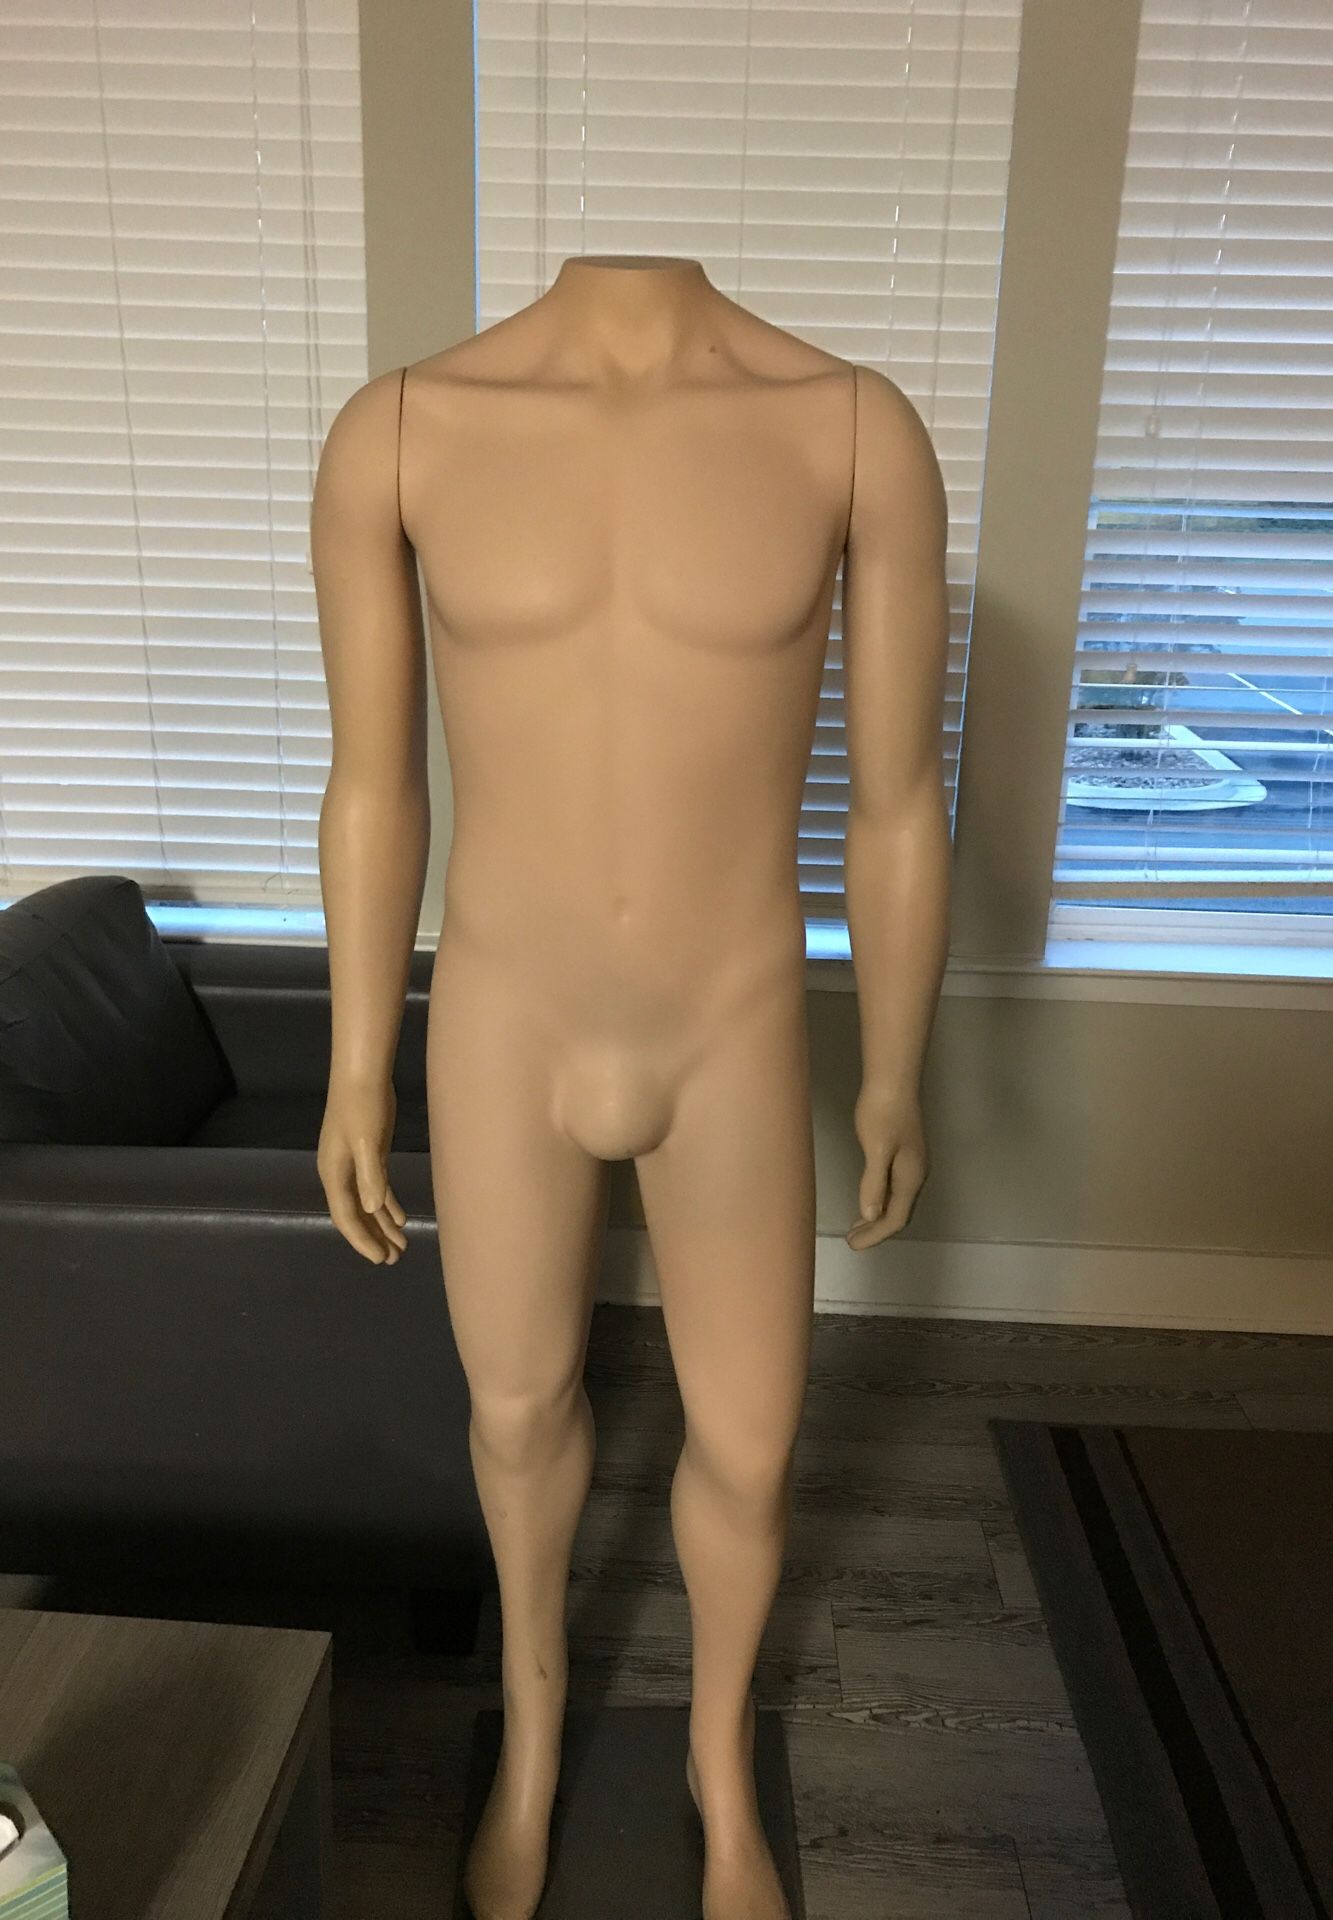 Mannequin for sale